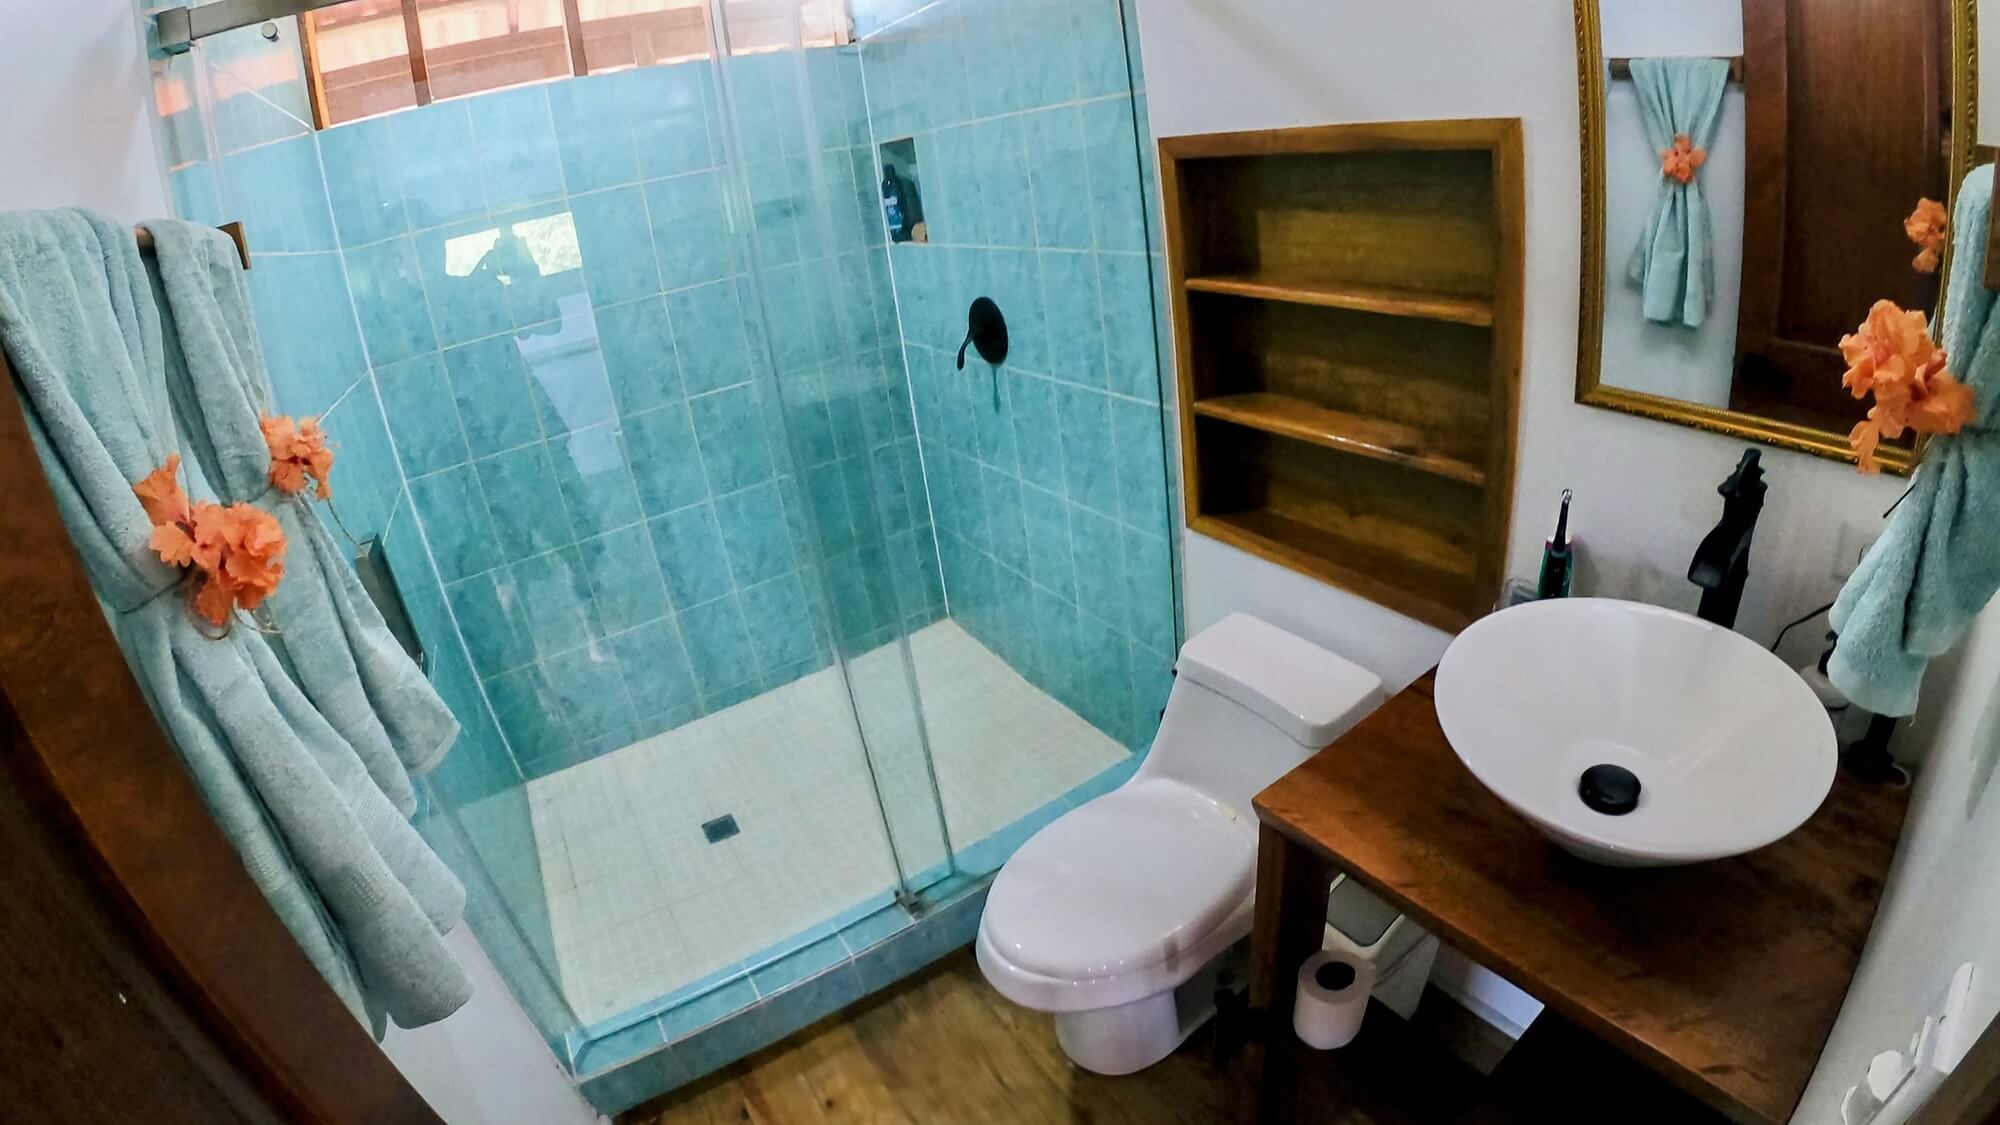 A bathroom with a toilet, sink and shower.